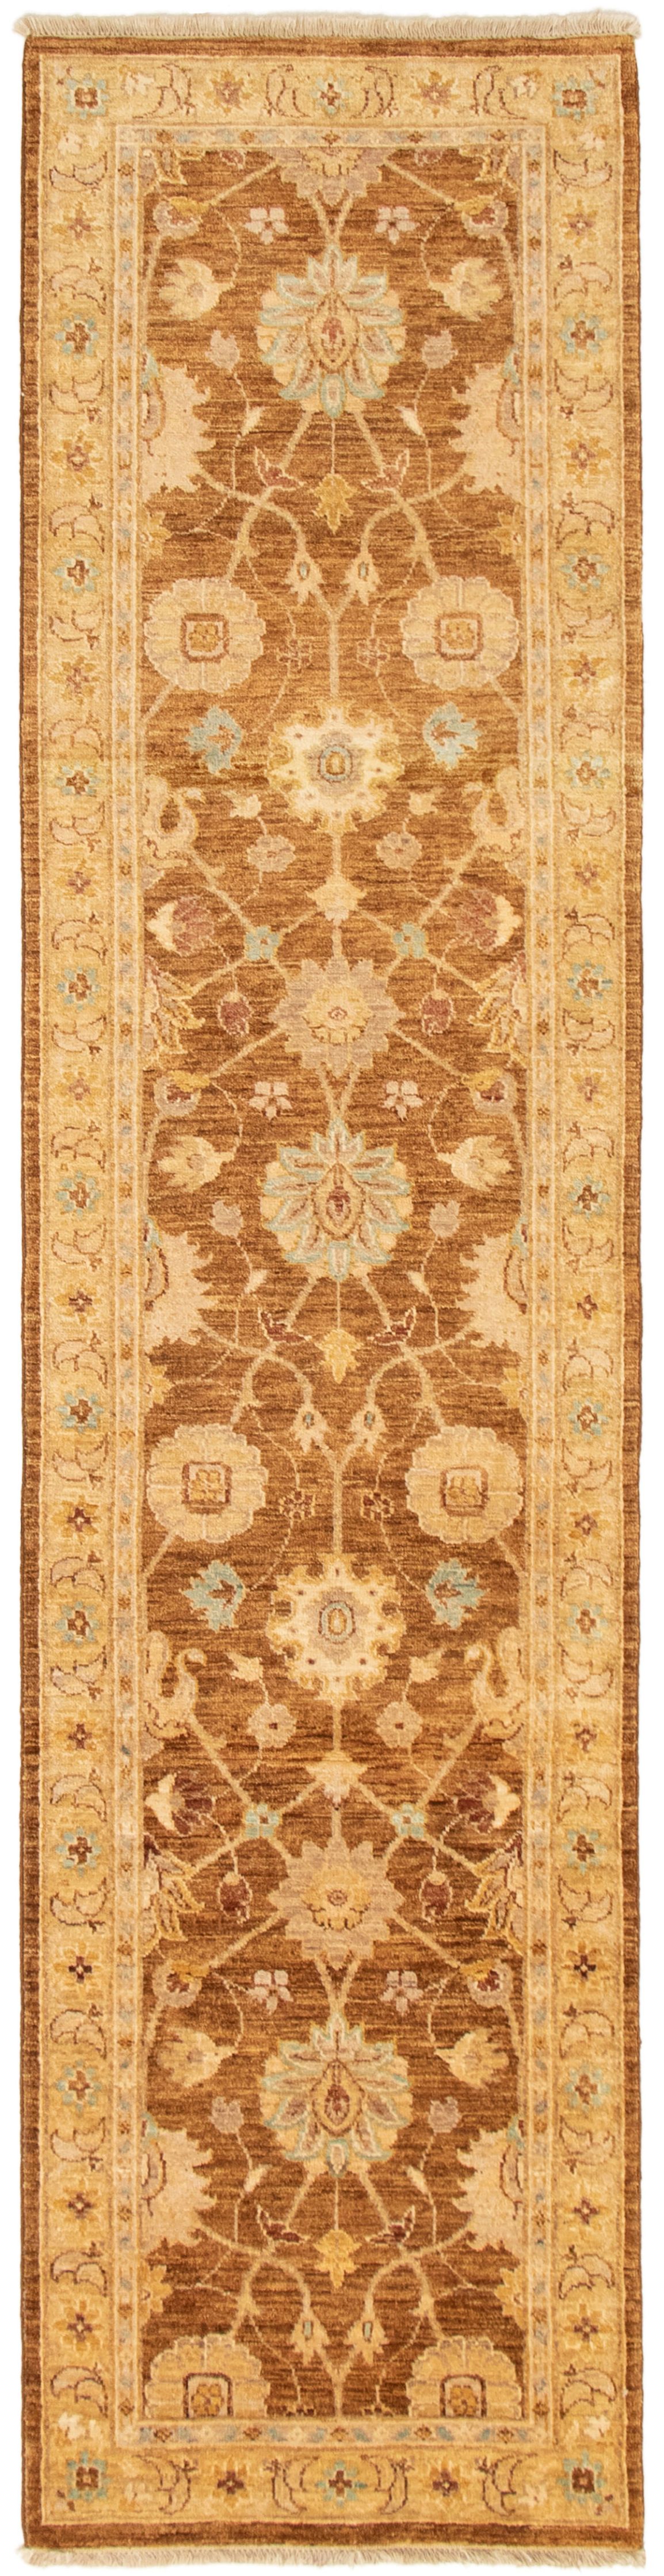 Hand-knotted Chobi Twisted Brown Wool Rug 2'6" x 10'3" Size: 2'6" x 10'3"  